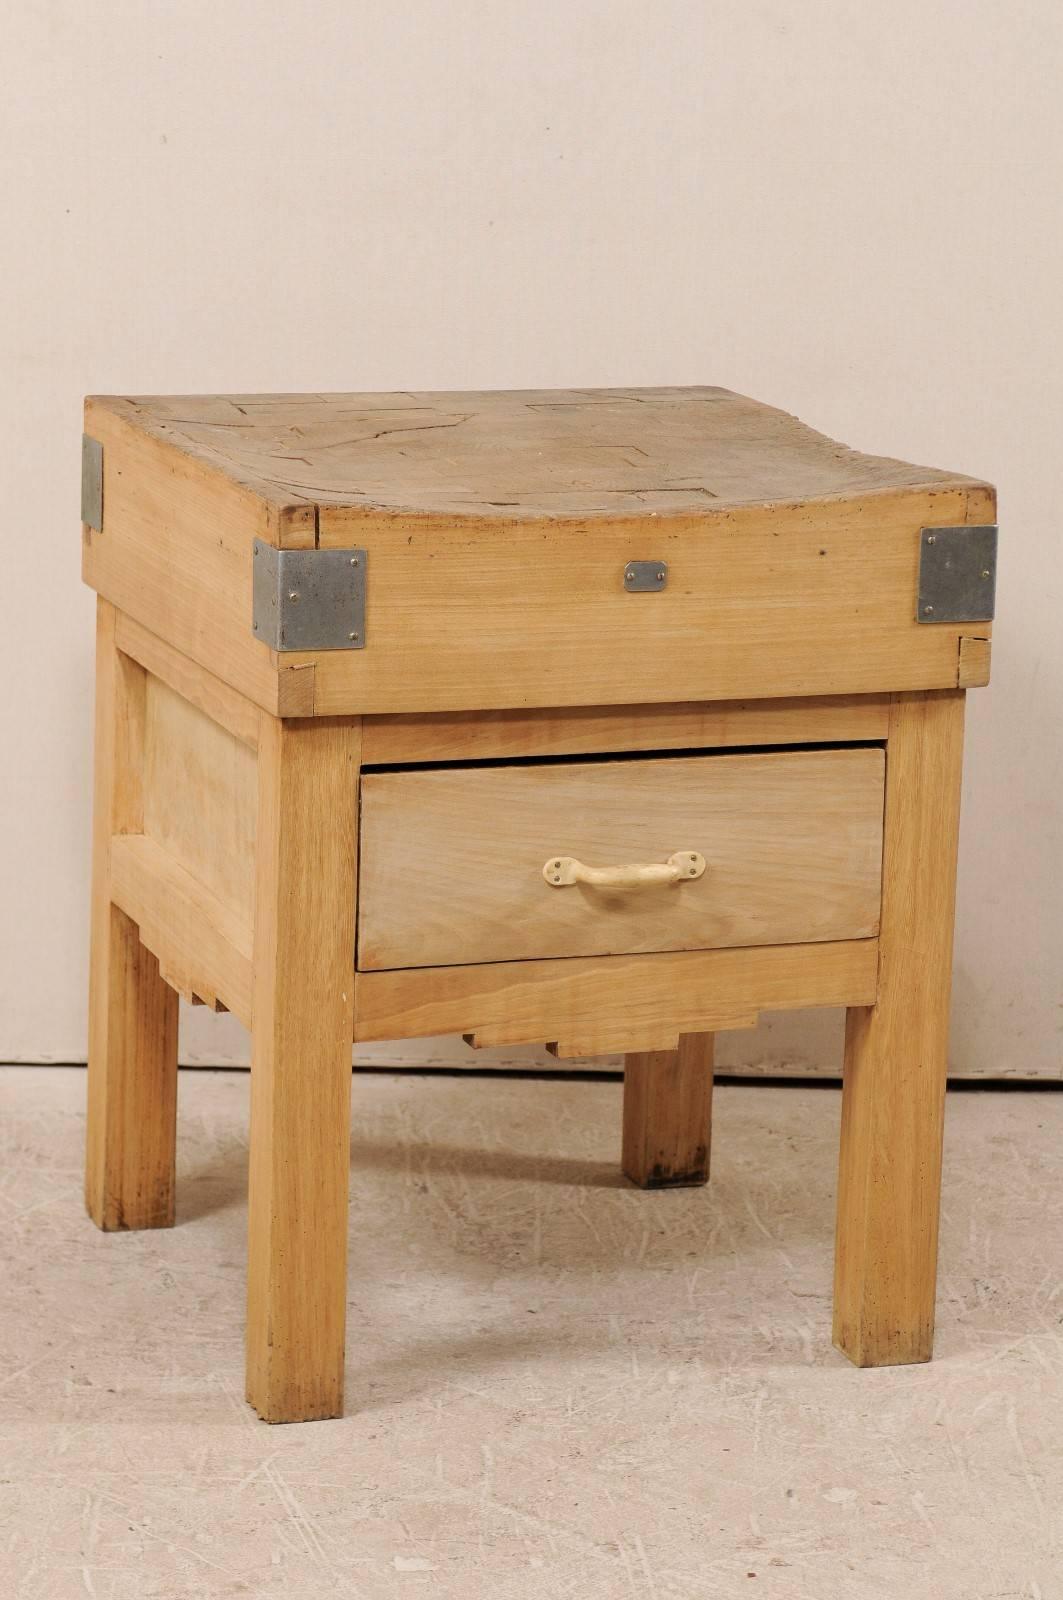 A vintage Swedish butcher block table. This square shaped butcher block table features a thick butcher block top over a single, large drawer. The top has wrapped metal plates at all four corners. The skirt has a graduated, step down feature carved